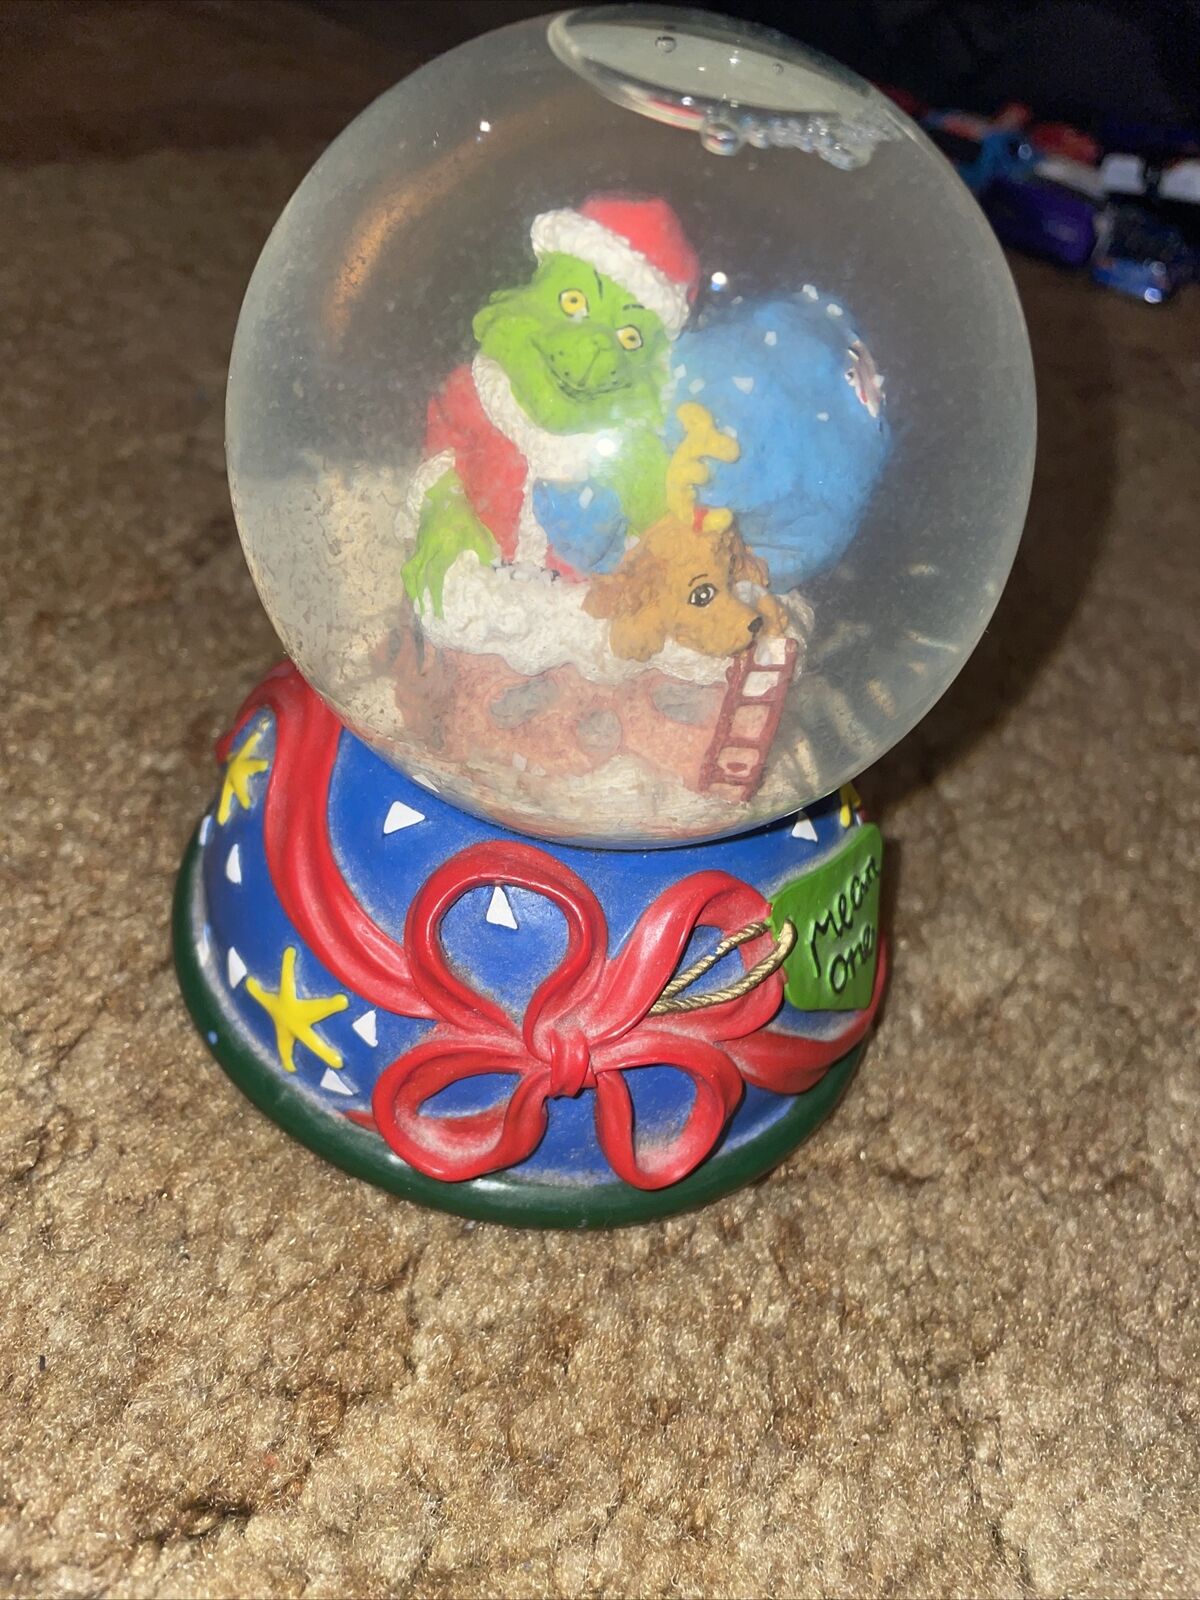 The Grinch - Mean One - Vintage Snowglobe 